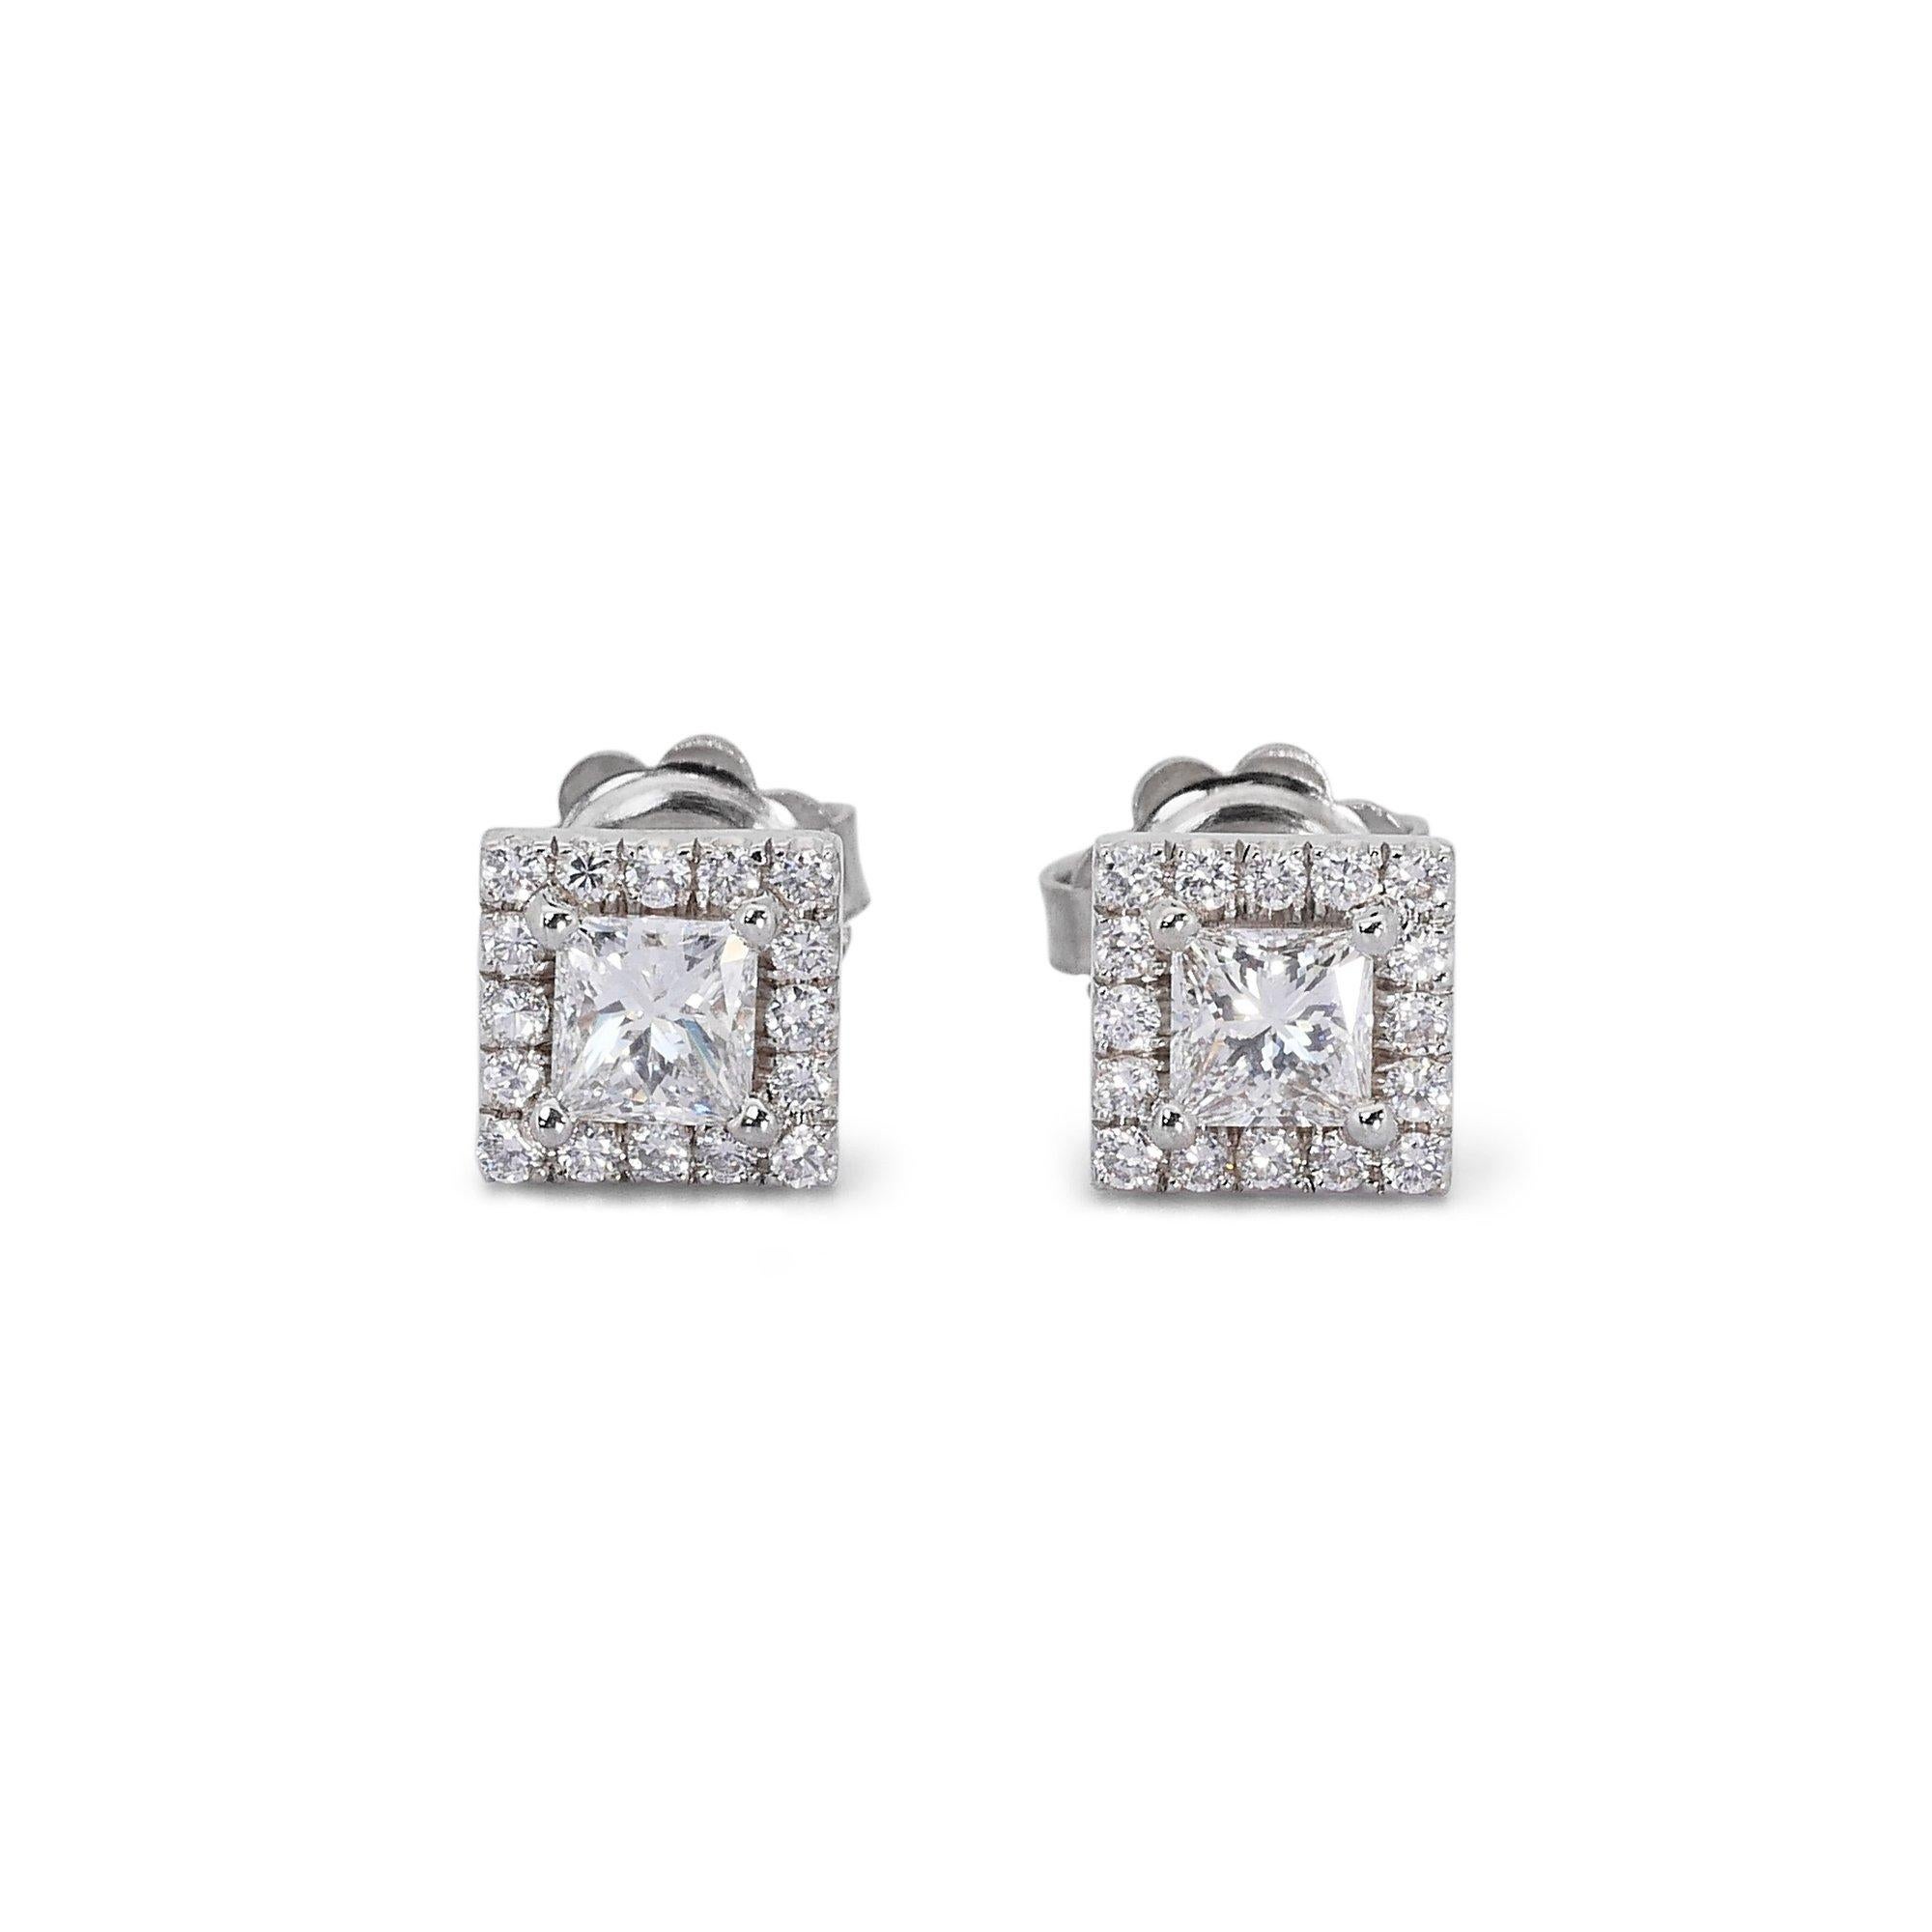 Enchanting 1.33ct Diamond Halo Stud Earrings in 18k White Gold - GIA Certified  For Sale 4